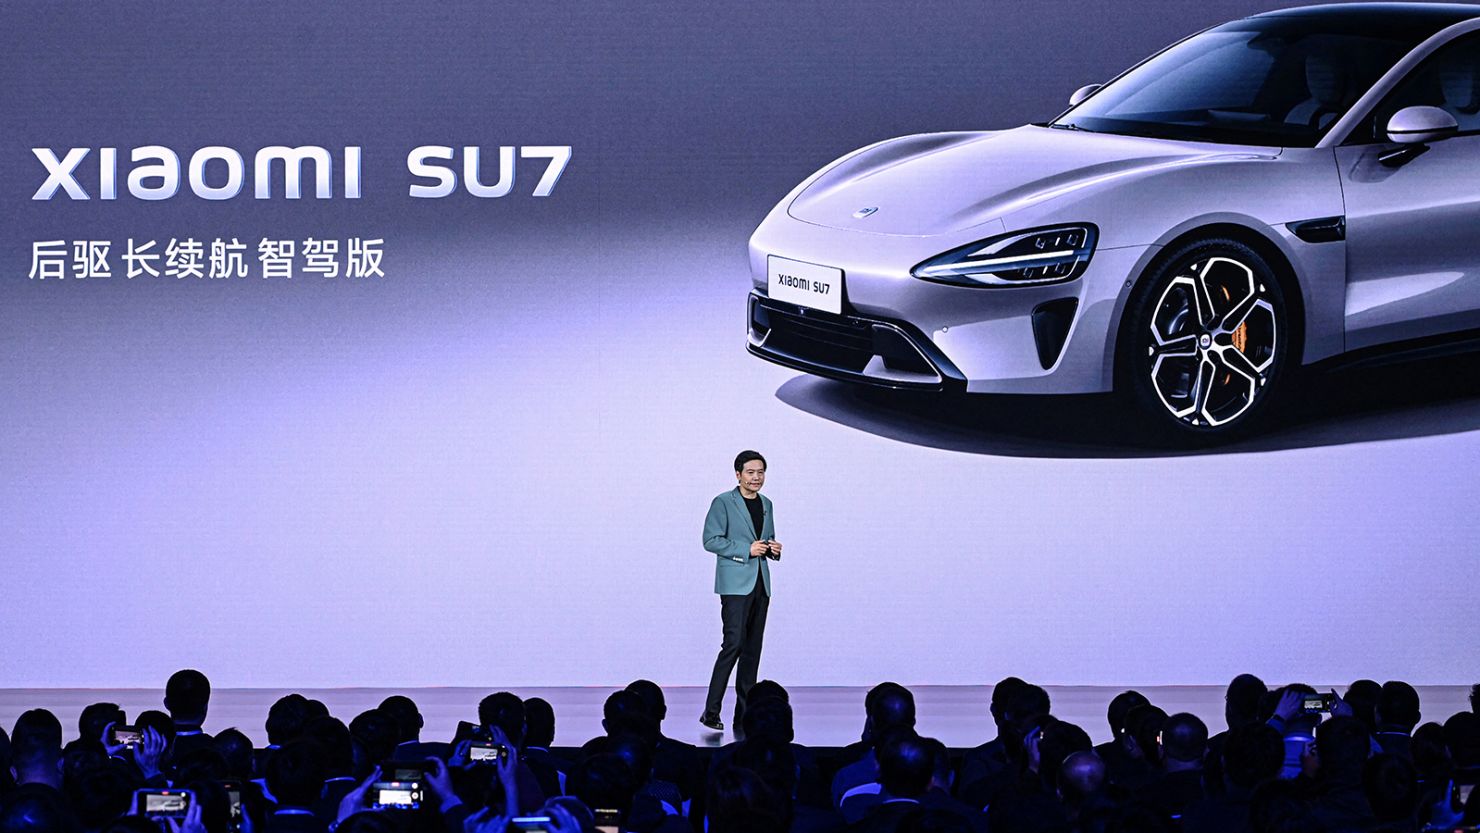 Lei Jun, Chairman and CEO of Chinese electronics company Xiaomi, presents the new electric car Xiaomi SU7 model at a launch event in Beijing on March 28, 2024.